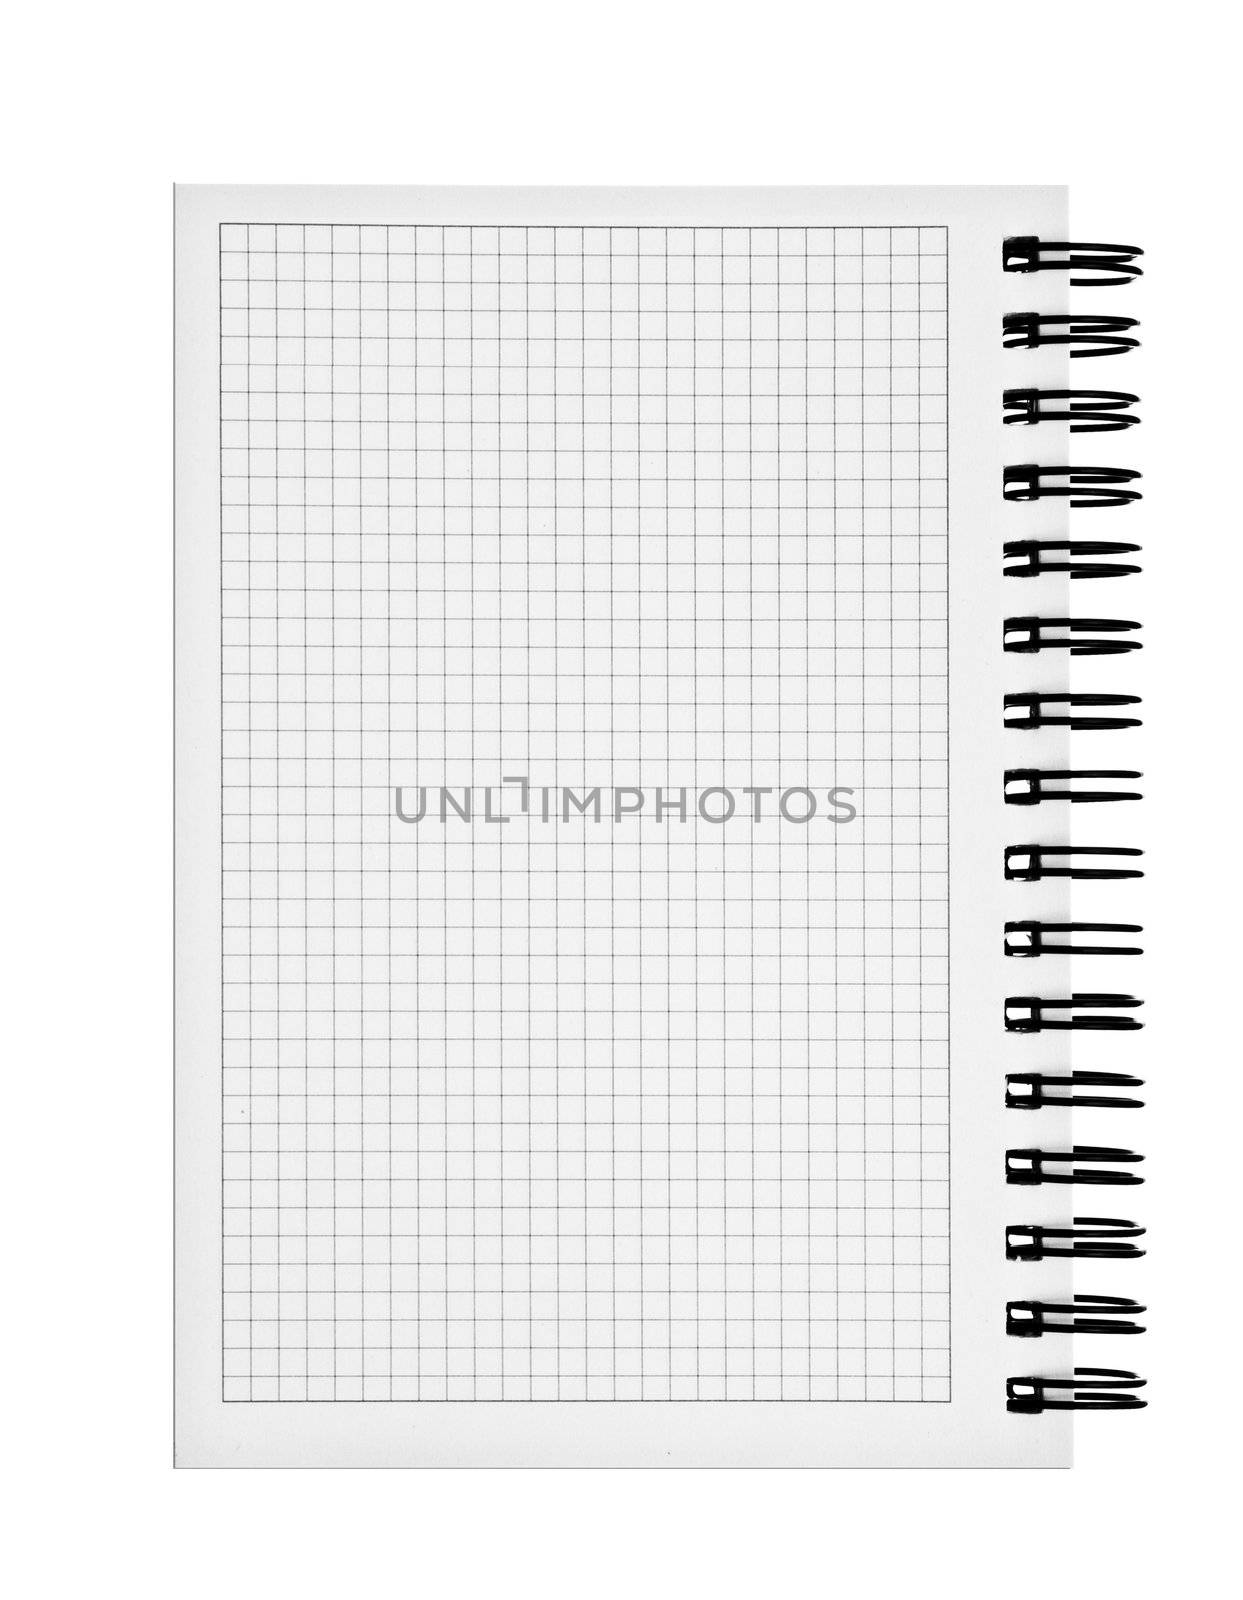 Datebook - isolated on the white background